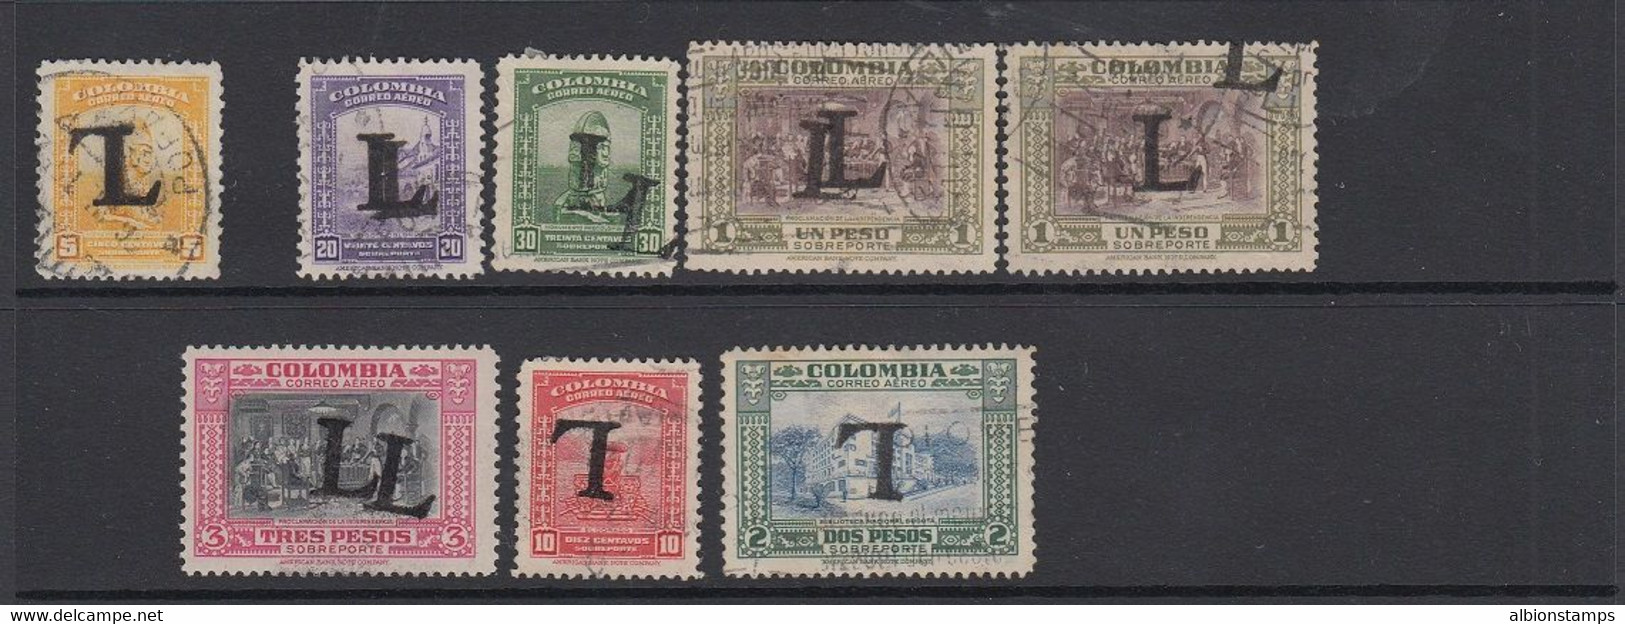 Colombia 1950 Lansa Overprint ERRORS (8 Used Examples) - Colombia